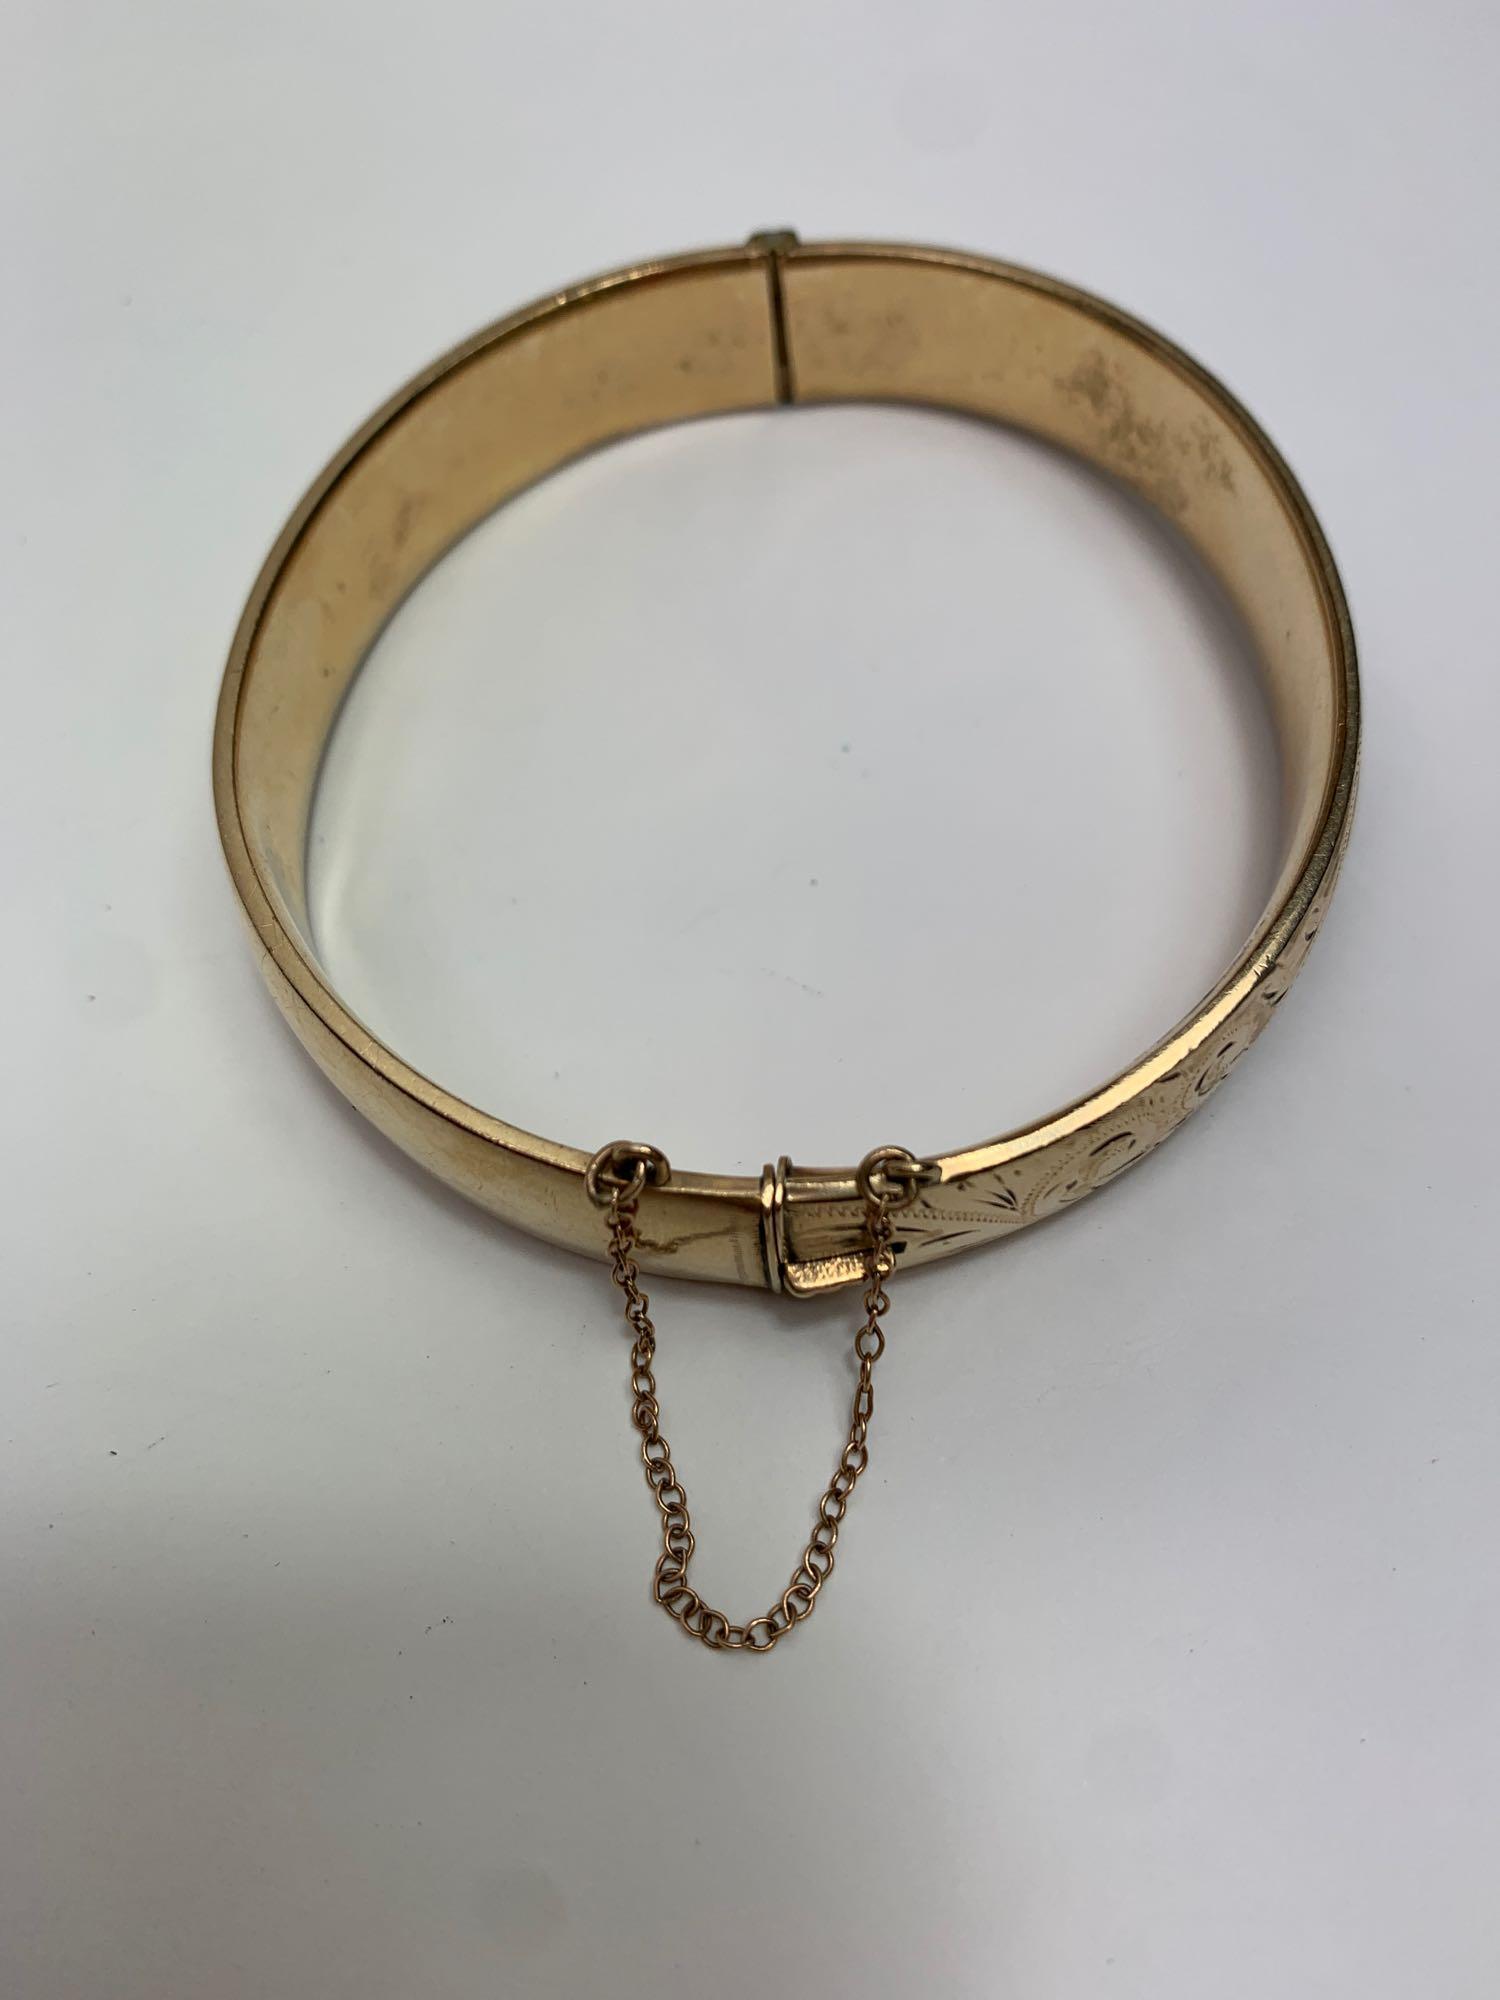 A gilt metal hinged bangle, with half engraved decoration, inner diameter 5.8 cm